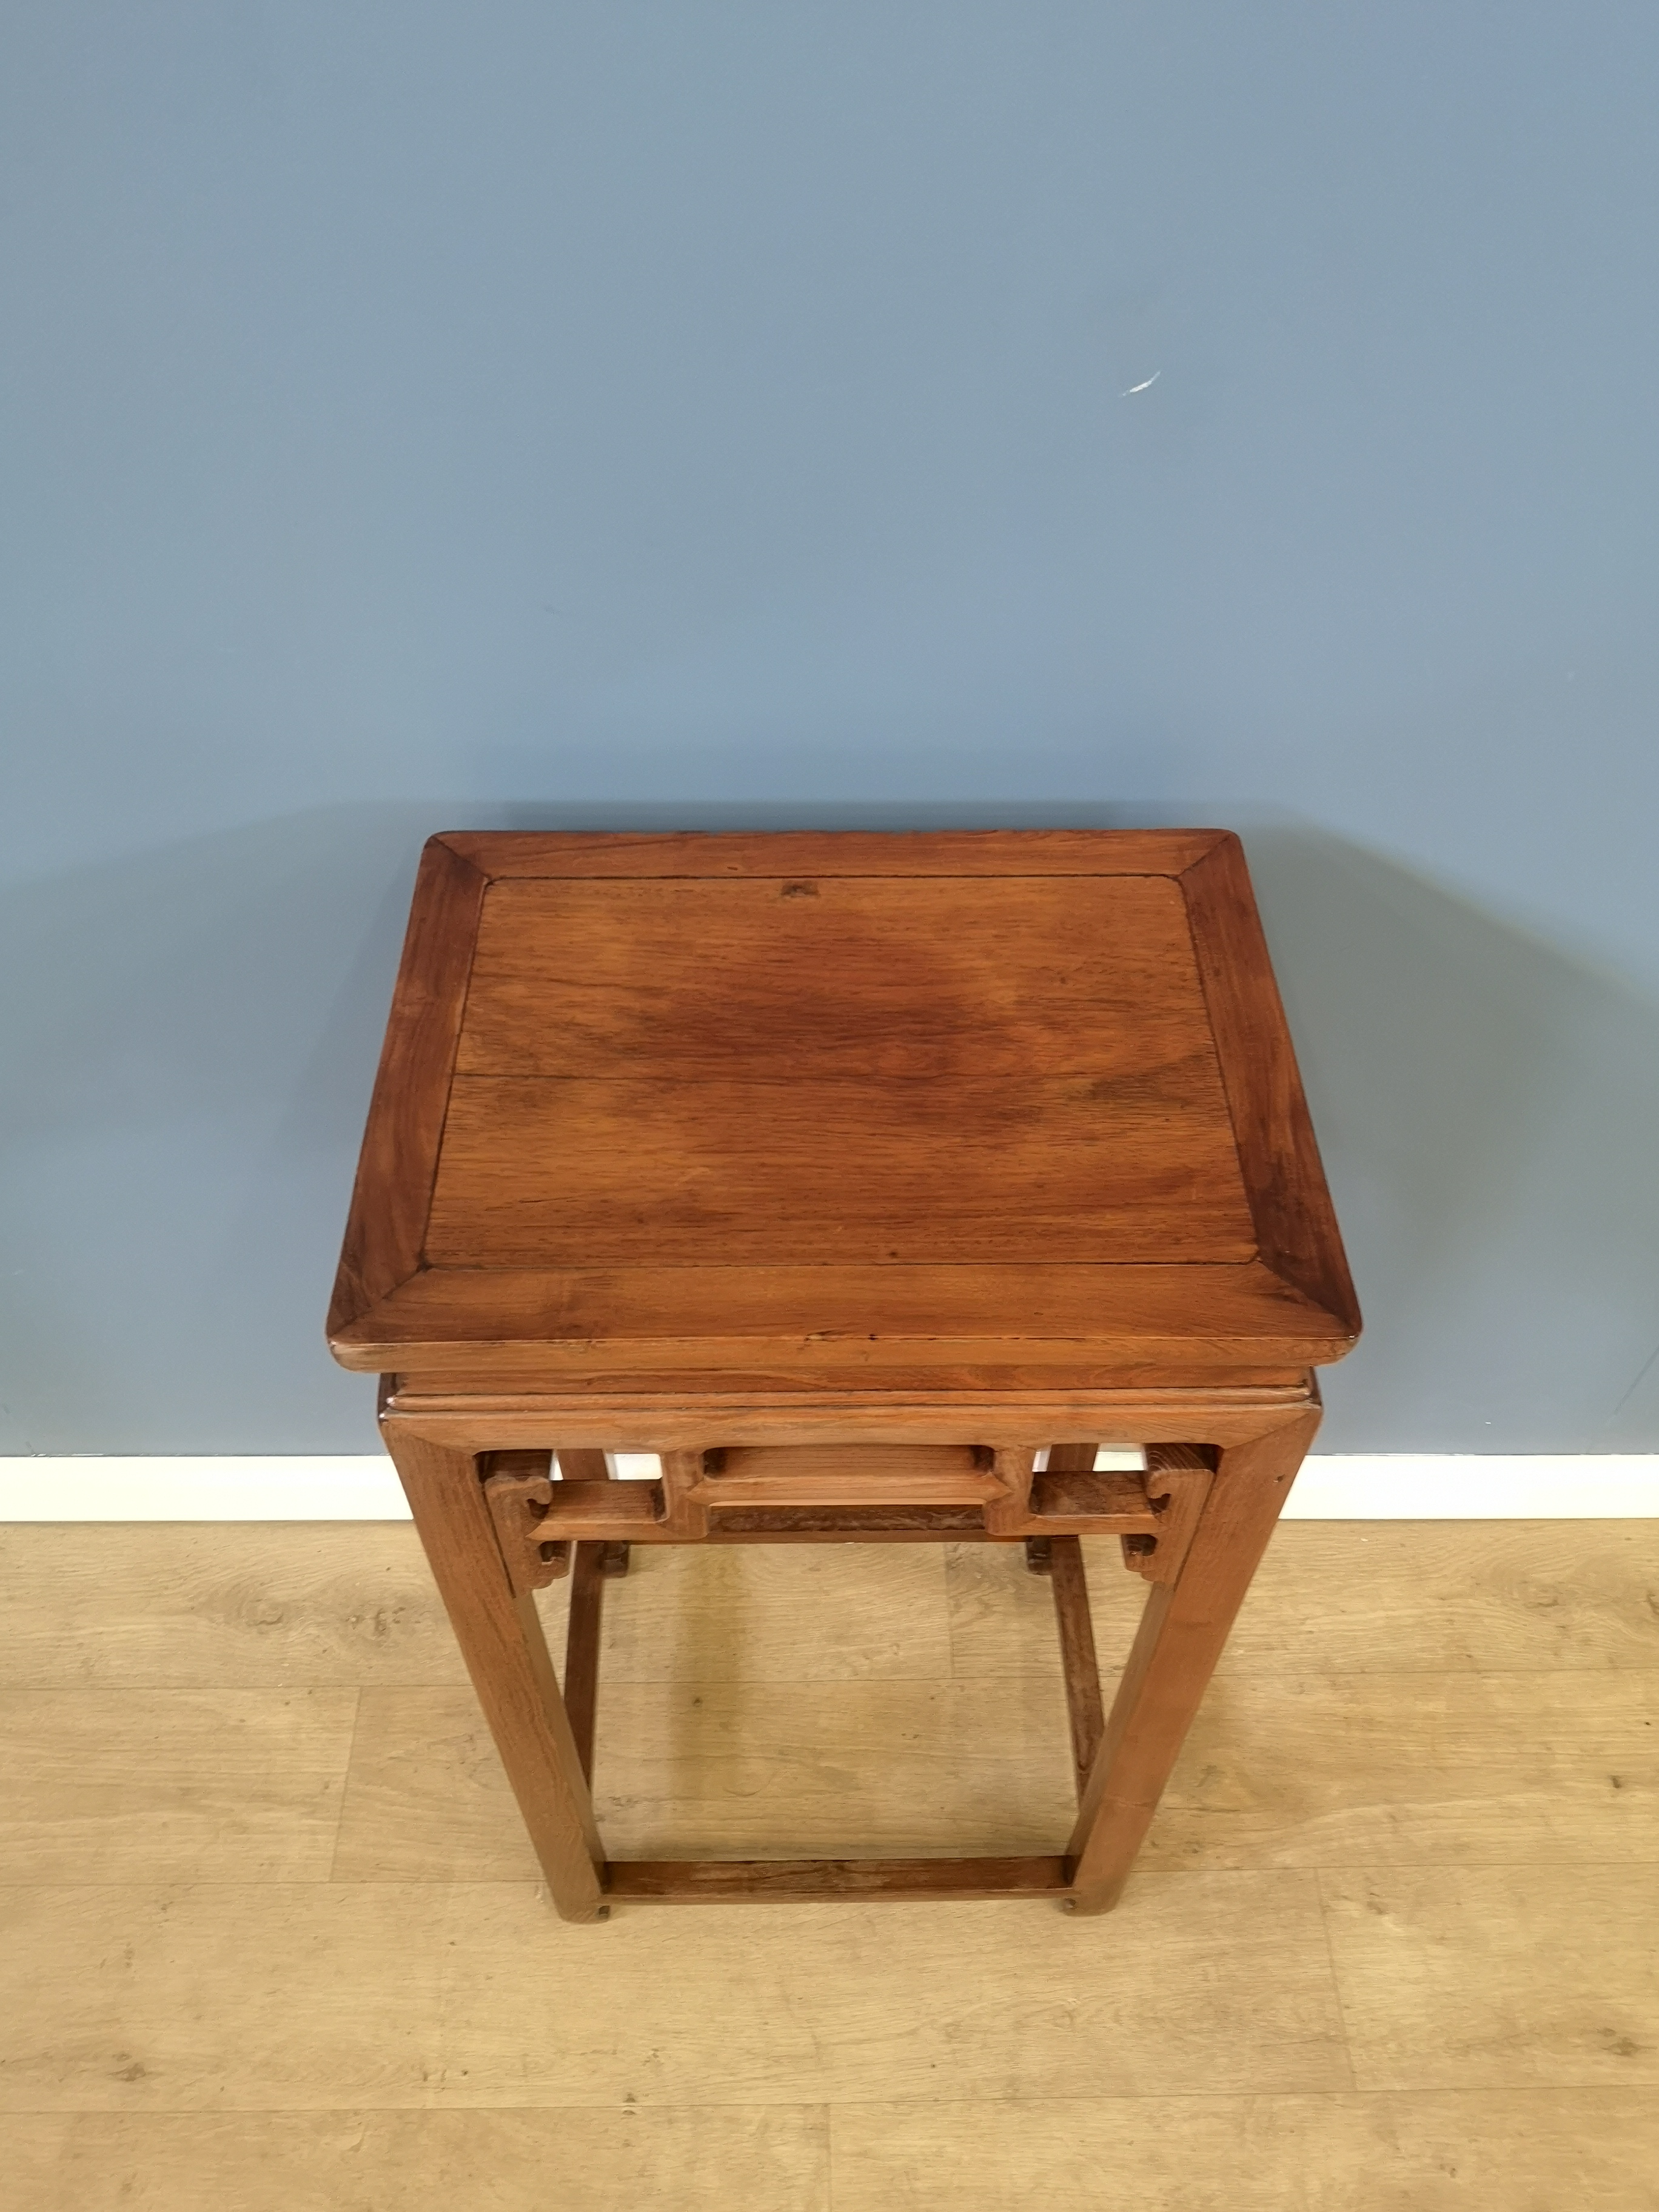 Oriental style side table - Image 2 of 5